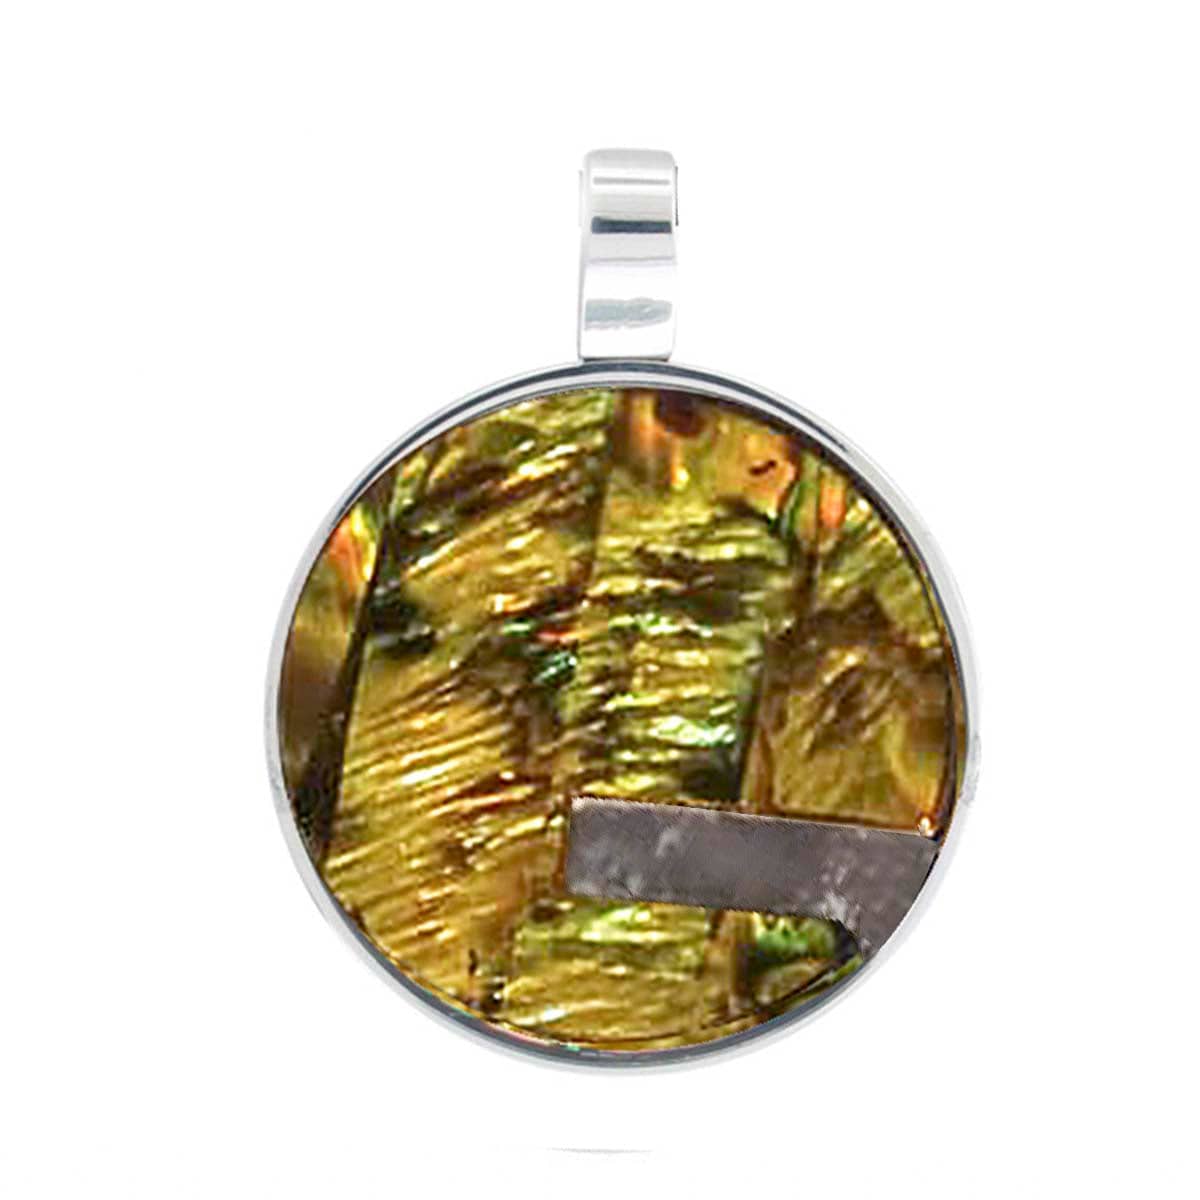 INOX JEWELRY Pendants Silver Tone Stainless Steel with Iridescent Abalone Shell Round Pendant SSP114-N